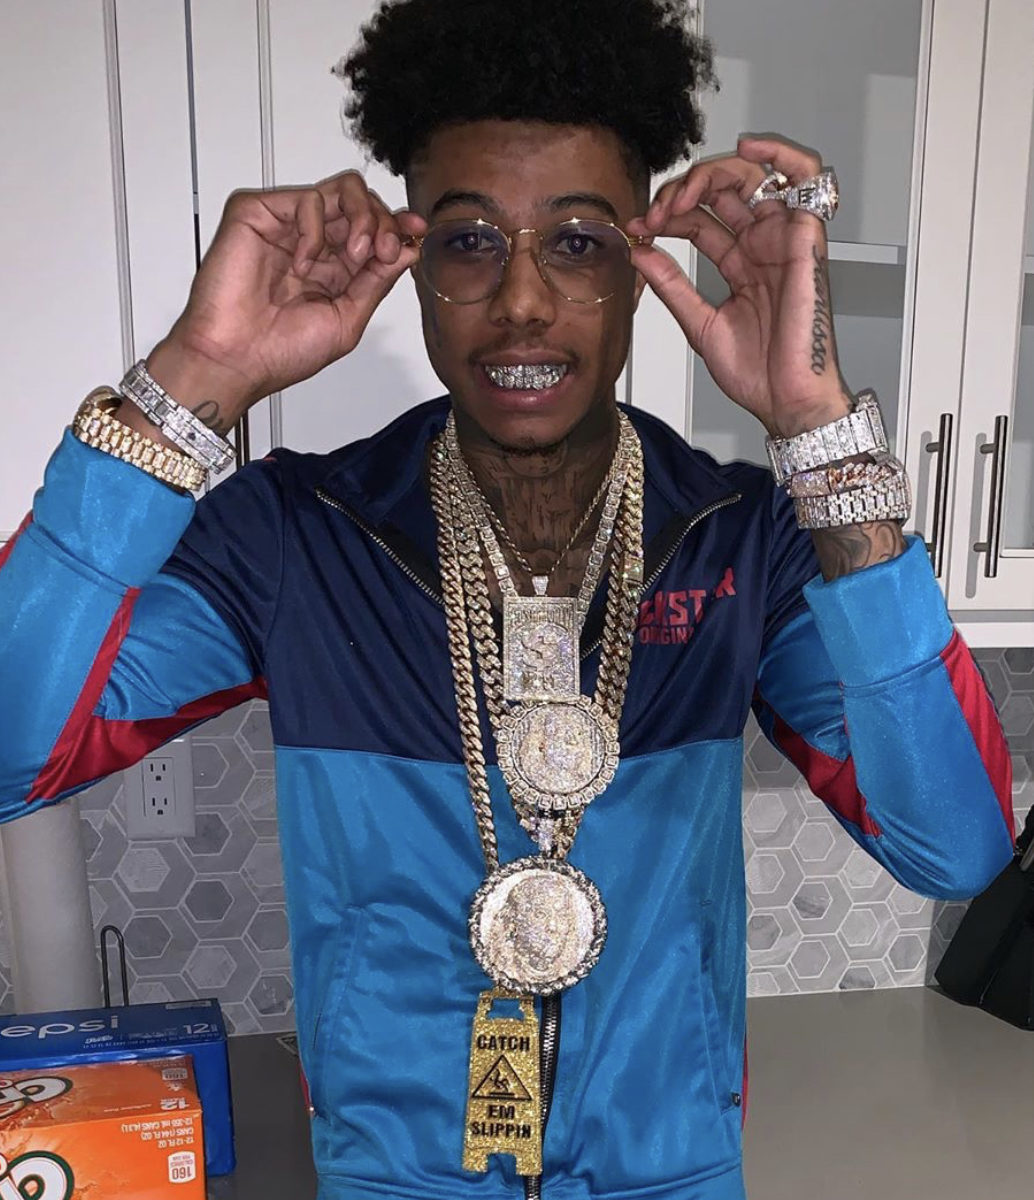 Blueface Trends on Twitter for Rapping on Beat on New Song - XXL